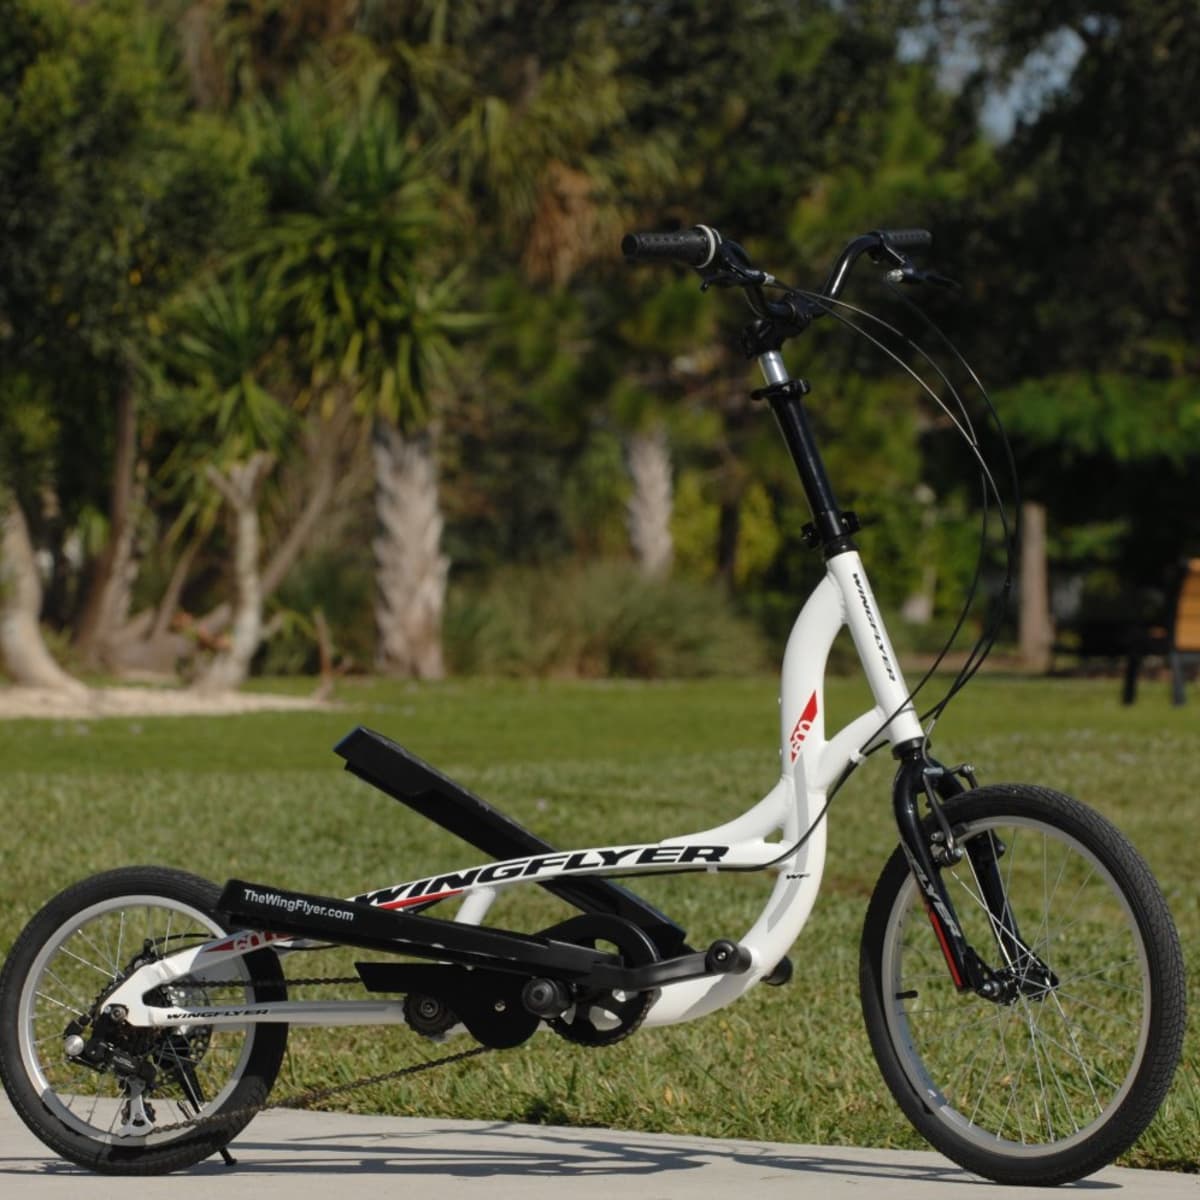 uitvoeren Dierentuin s nachts cruise Four Great Elliptical Scooter Bikes | Reviews & Suggestions - HubPages